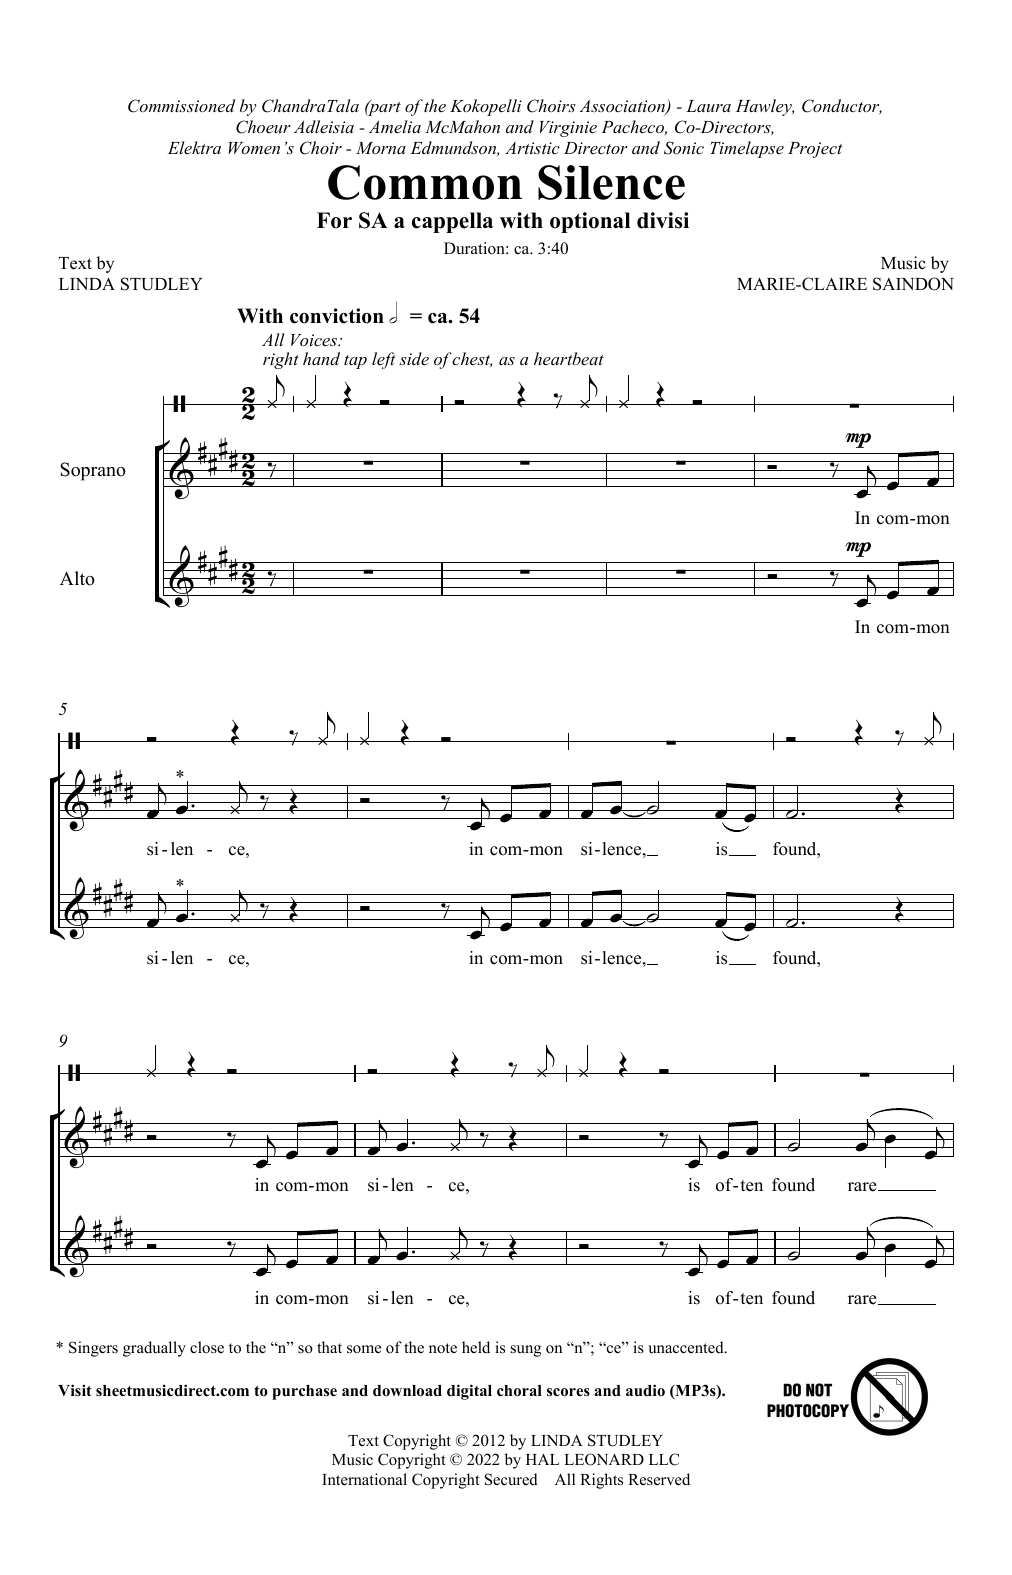 Download Marie-Claire Saindon Common Silence Sheet Music